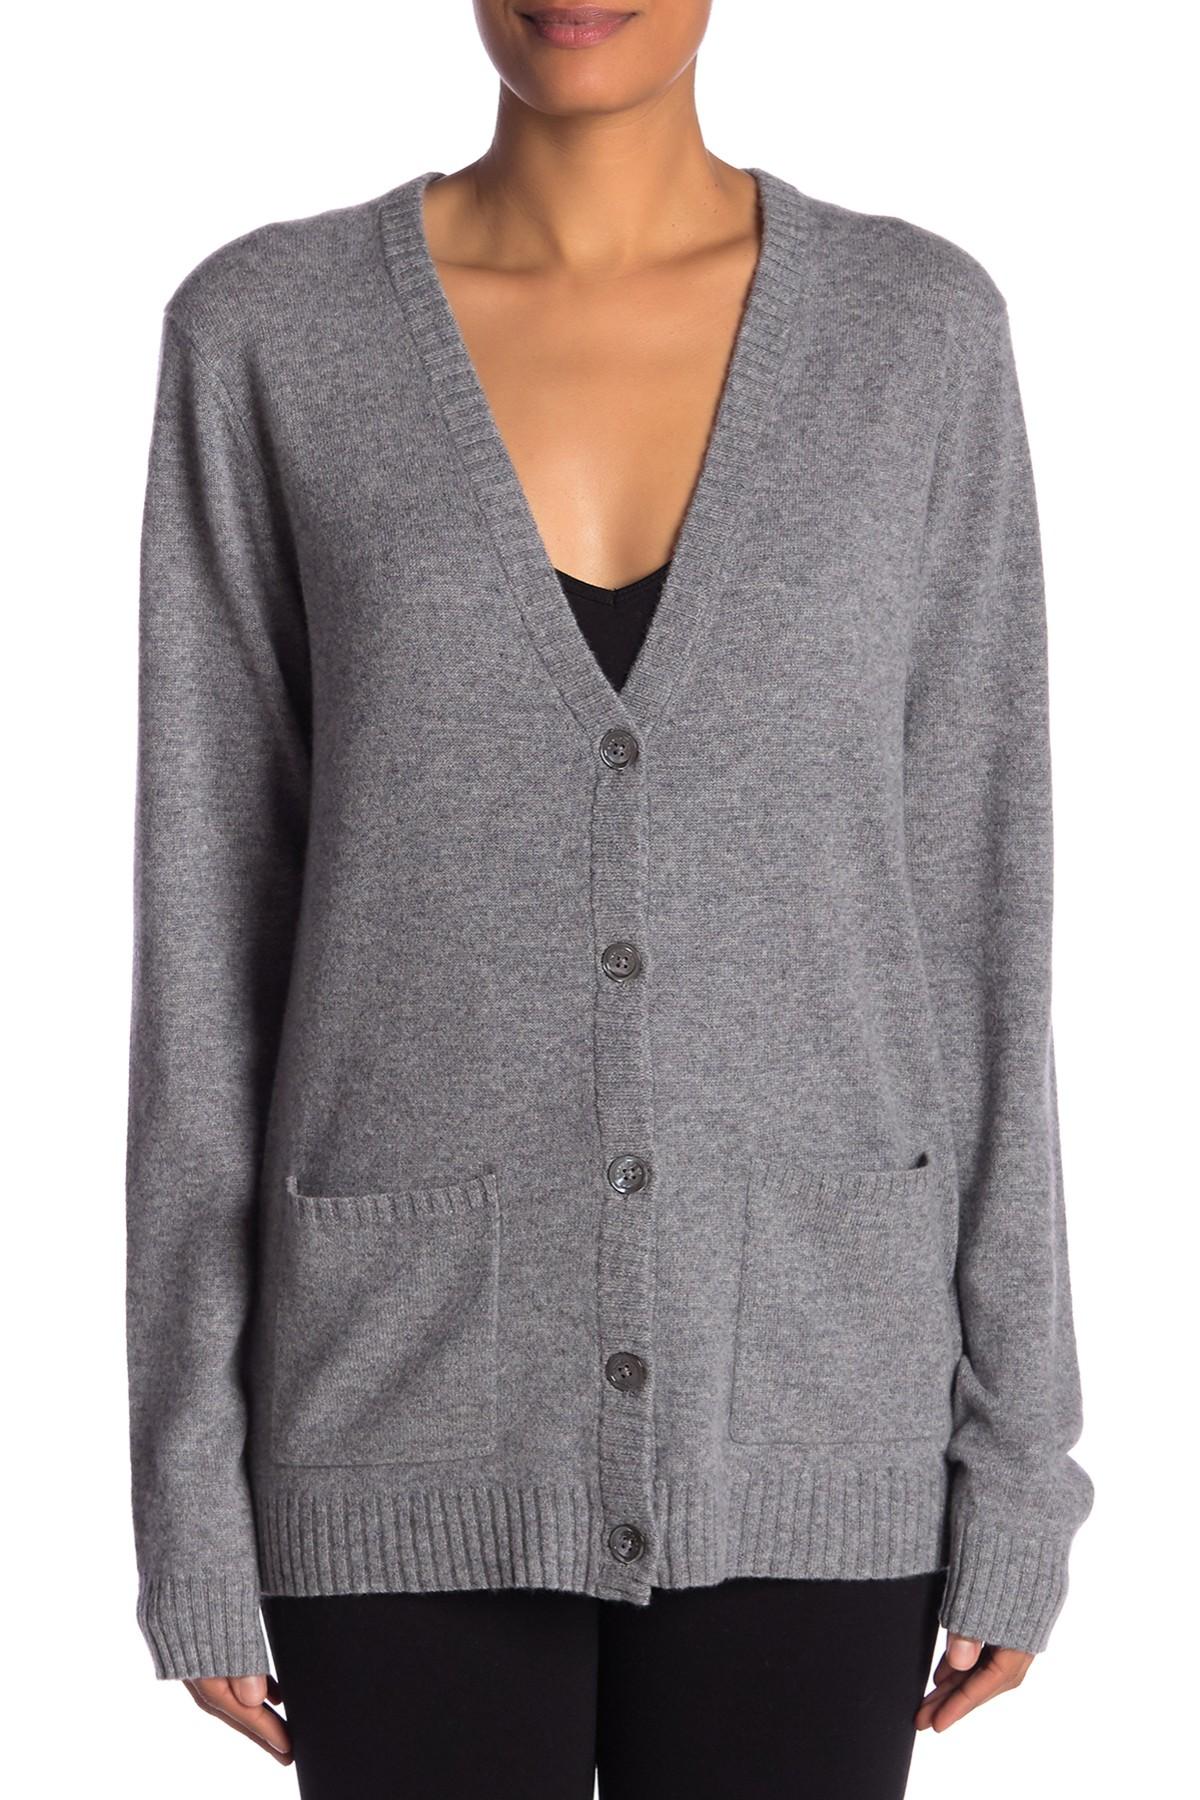 Equipment Whitley Cashmere Cardigan in Gray - Lyst